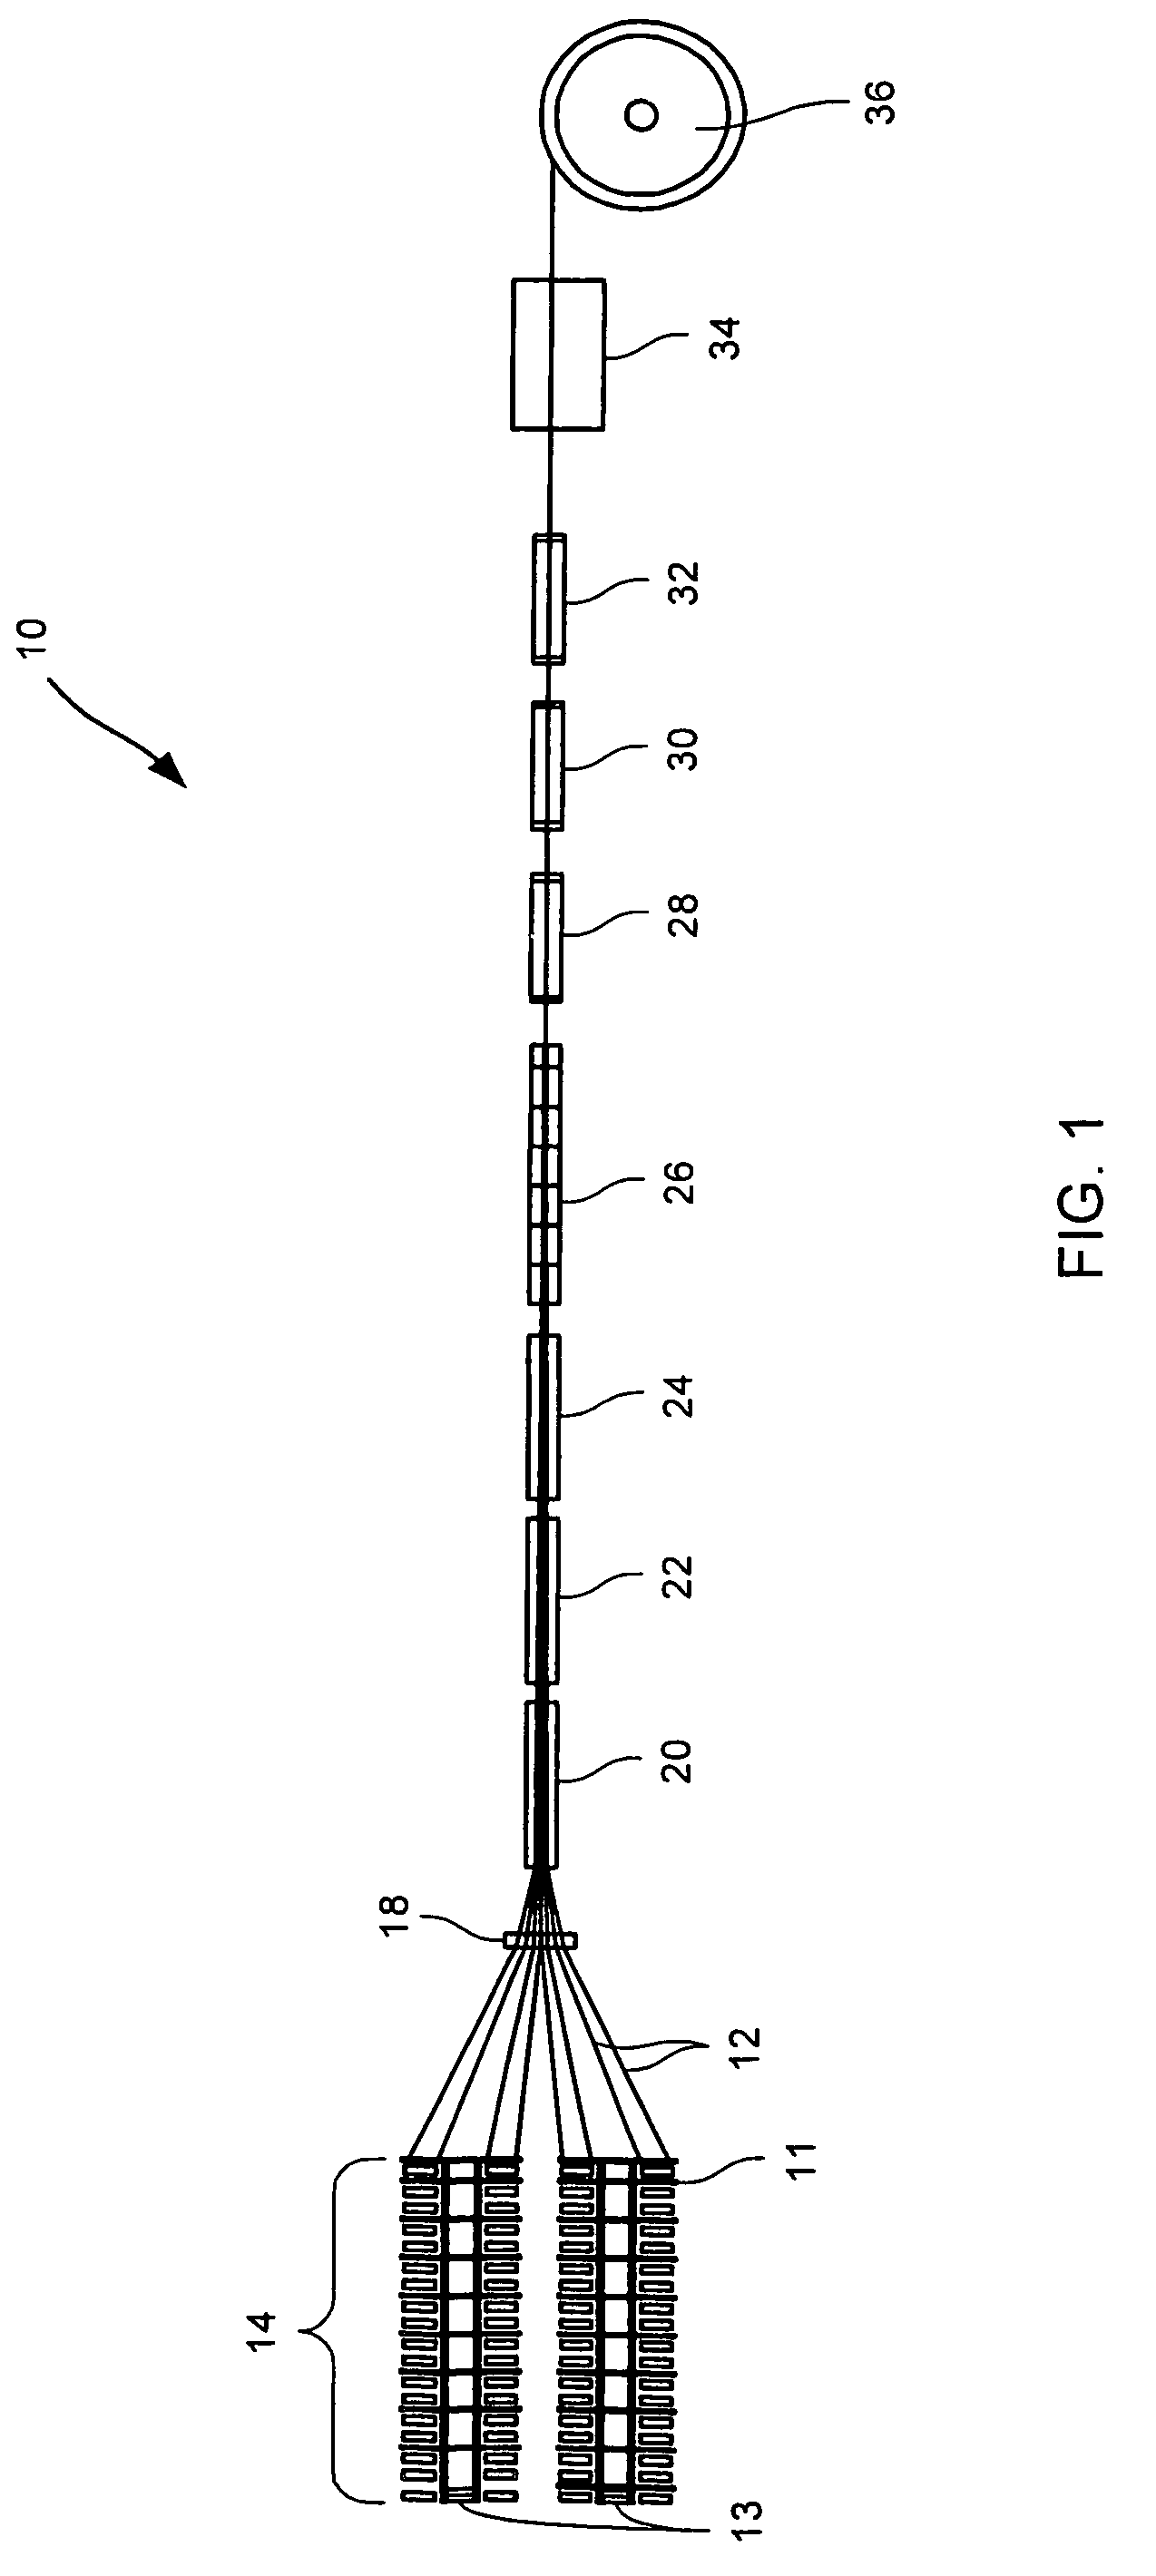 Off-axis fiber reinforced composite core for an aluminum conductor